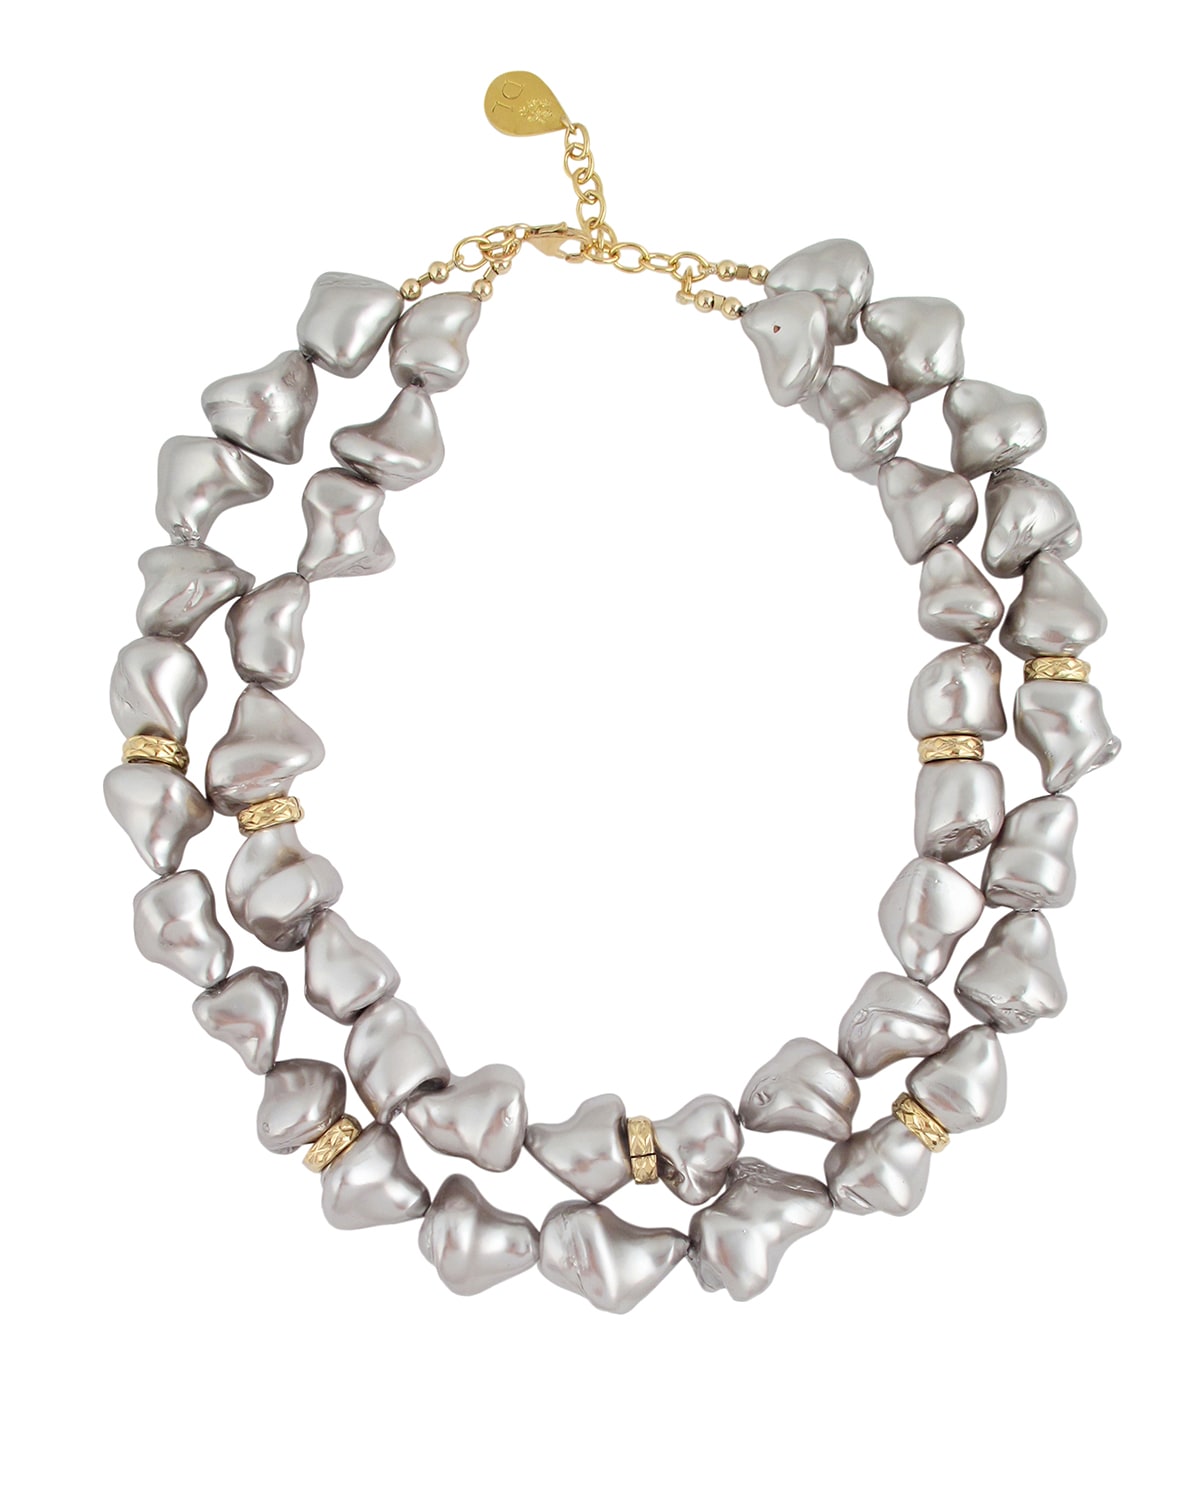 Devon Leigh Pearly 2-Strand Necklace